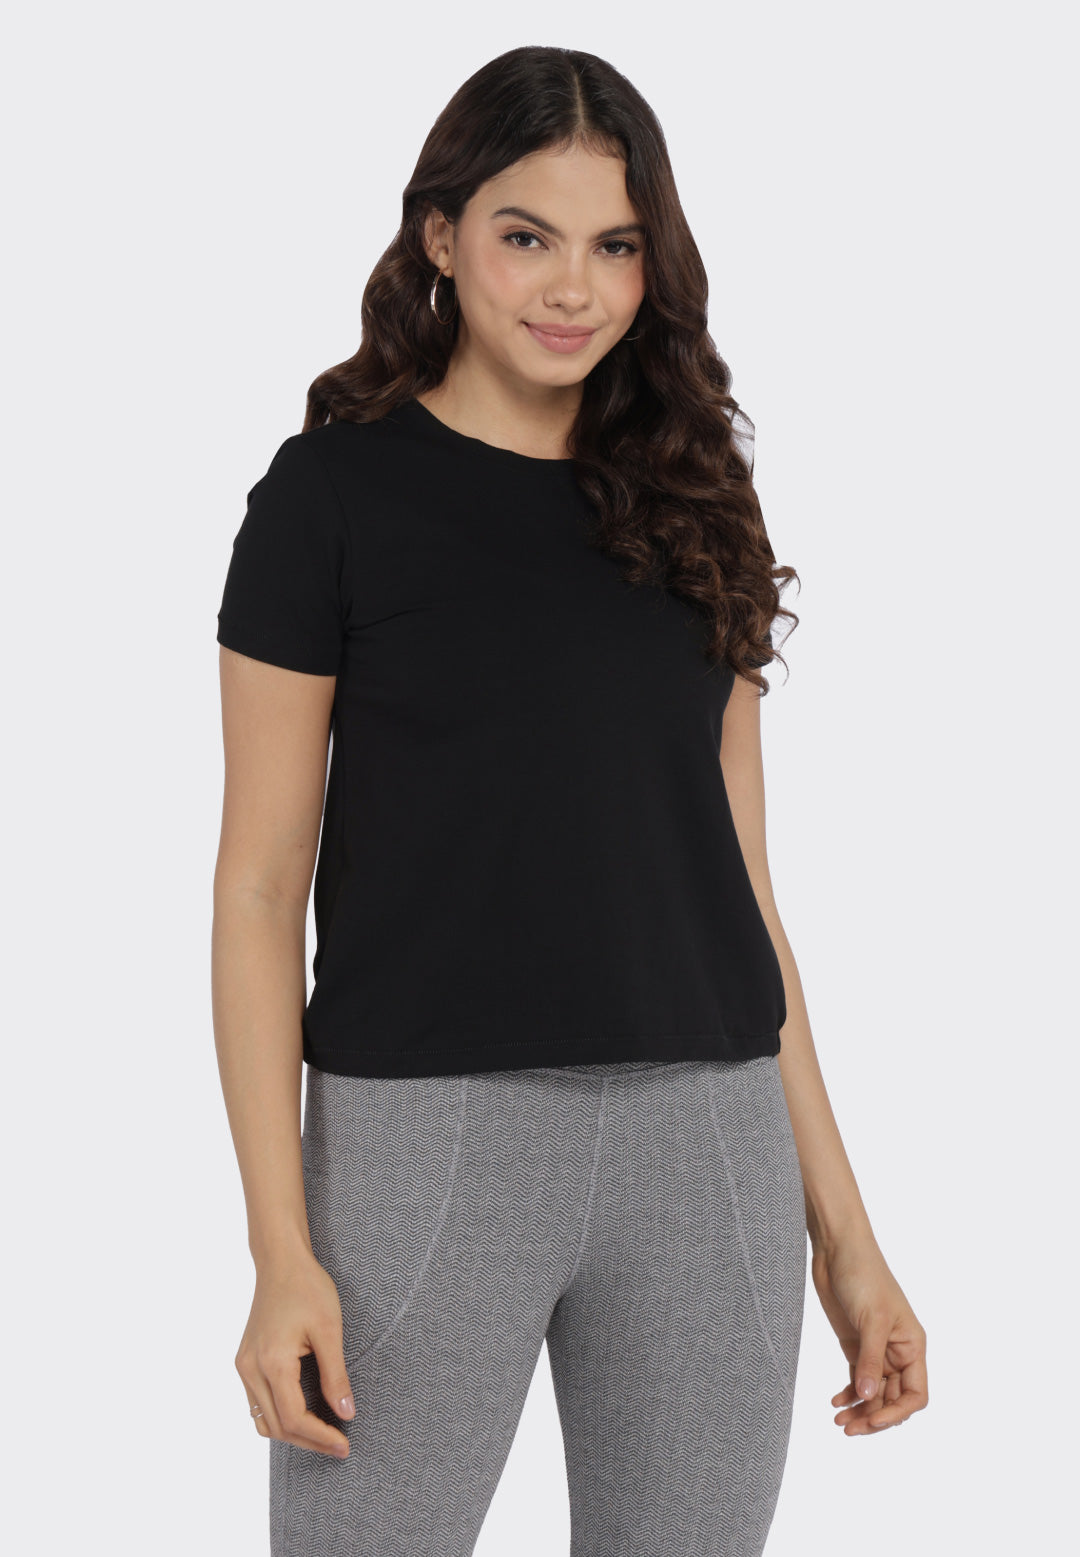 Durable Activewear by Blissclub  Buy & Try for 100 days 